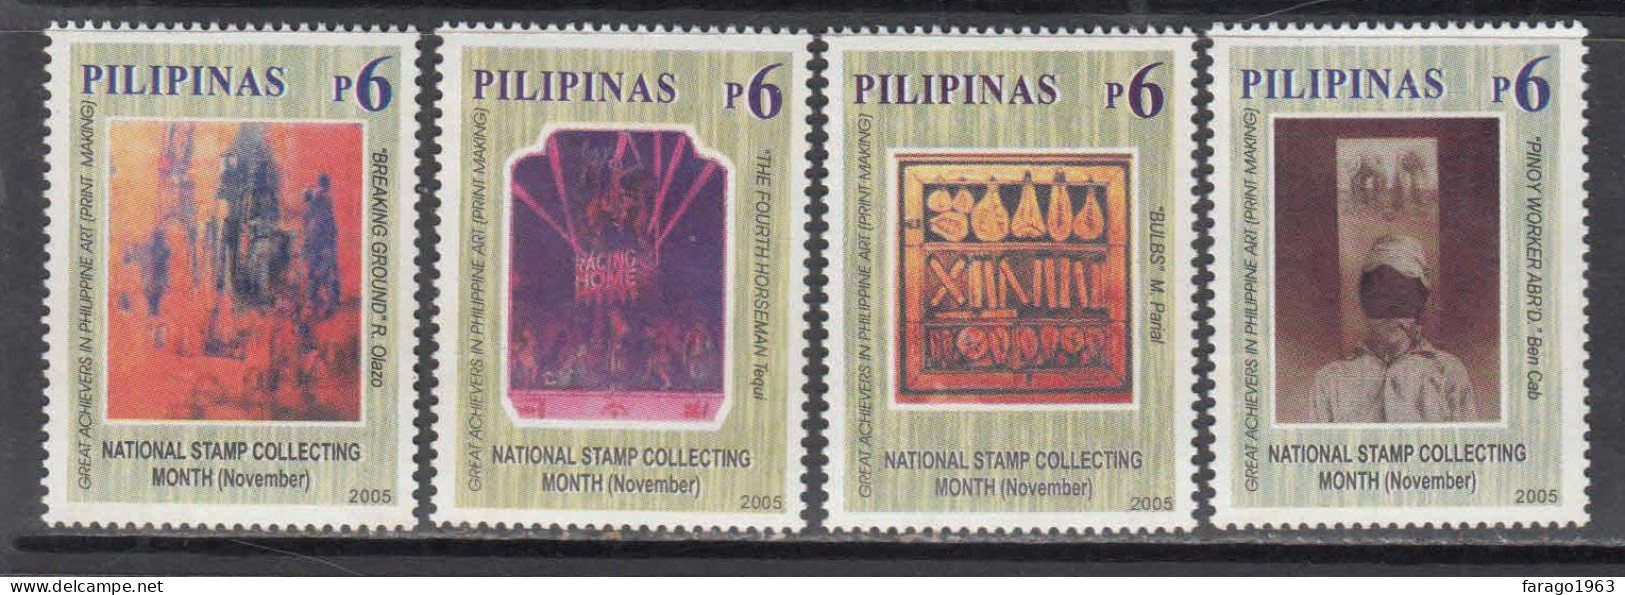 2005 Philippines National Stamp Collecting Month Art Prints Complete Set Of 4 MNH - Philippinen